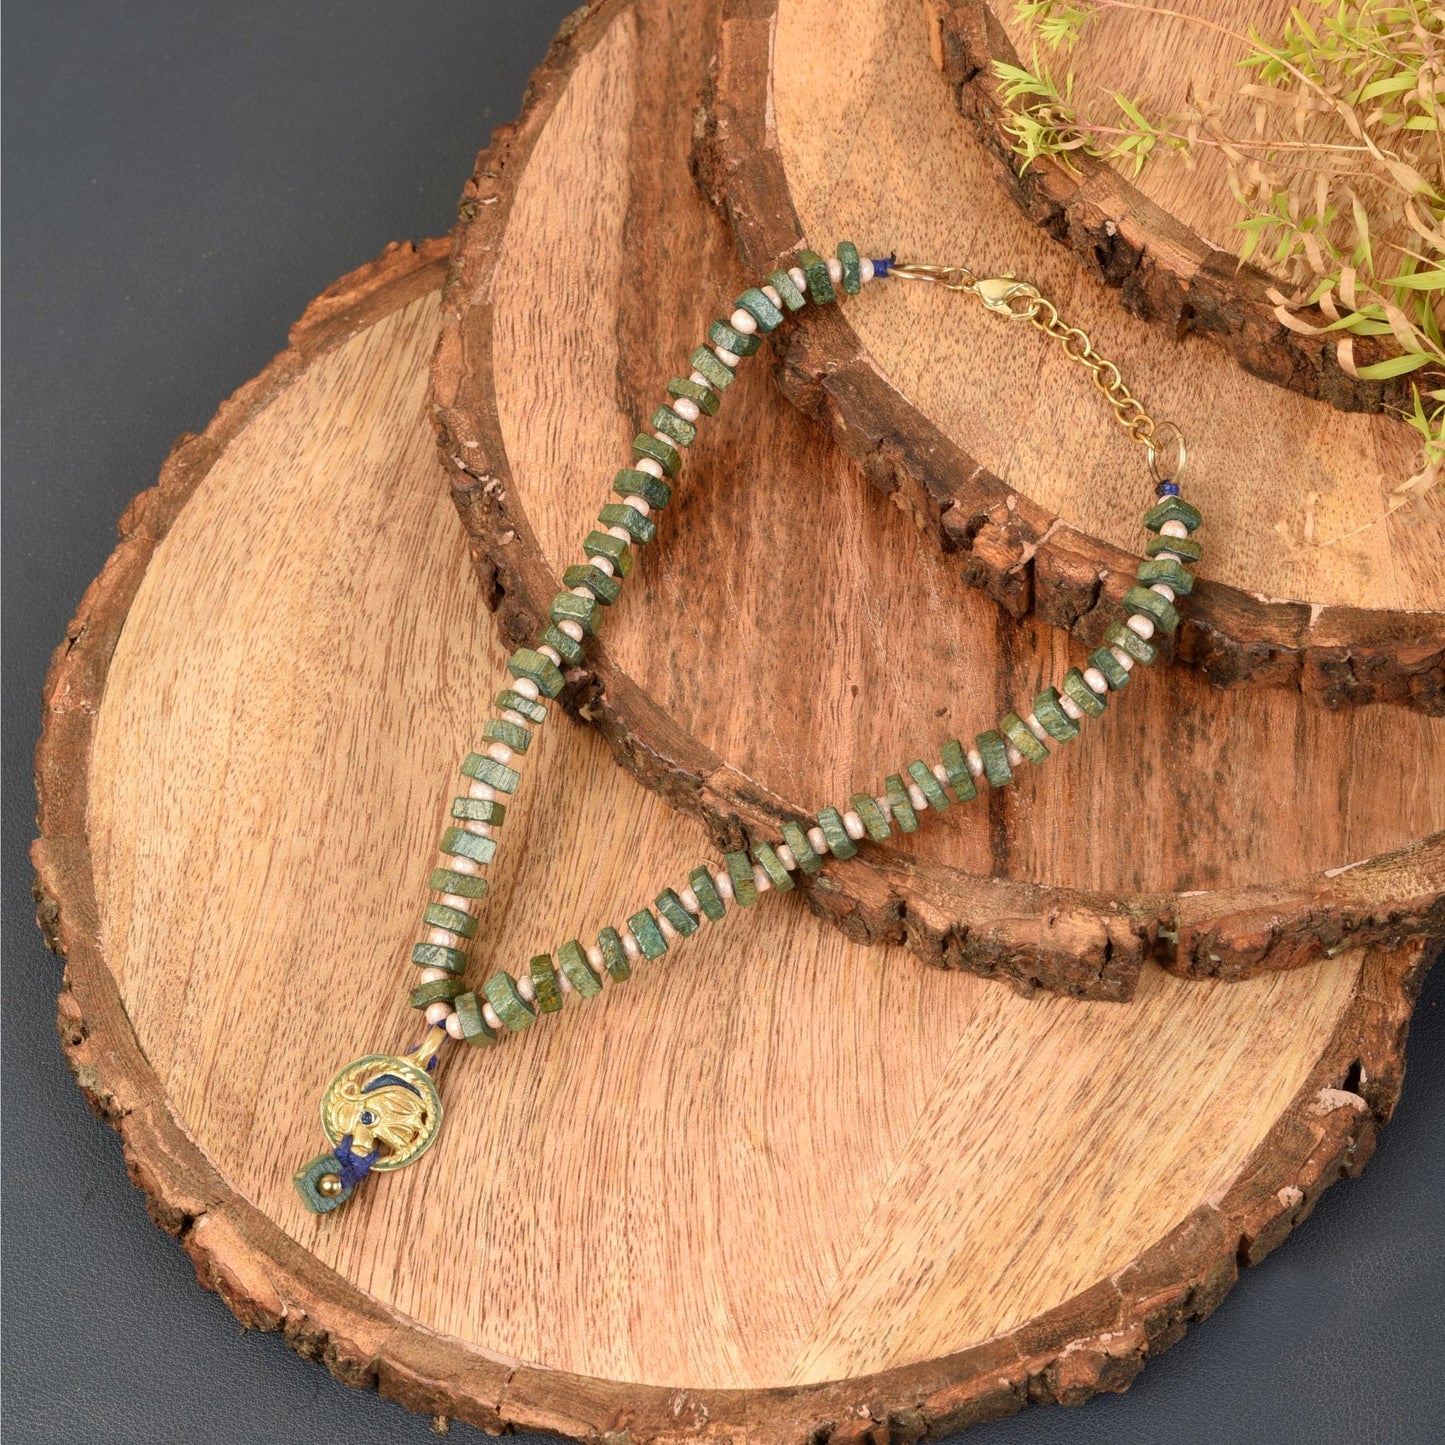 The Olive Queen Handcrafted Tribal Necklace